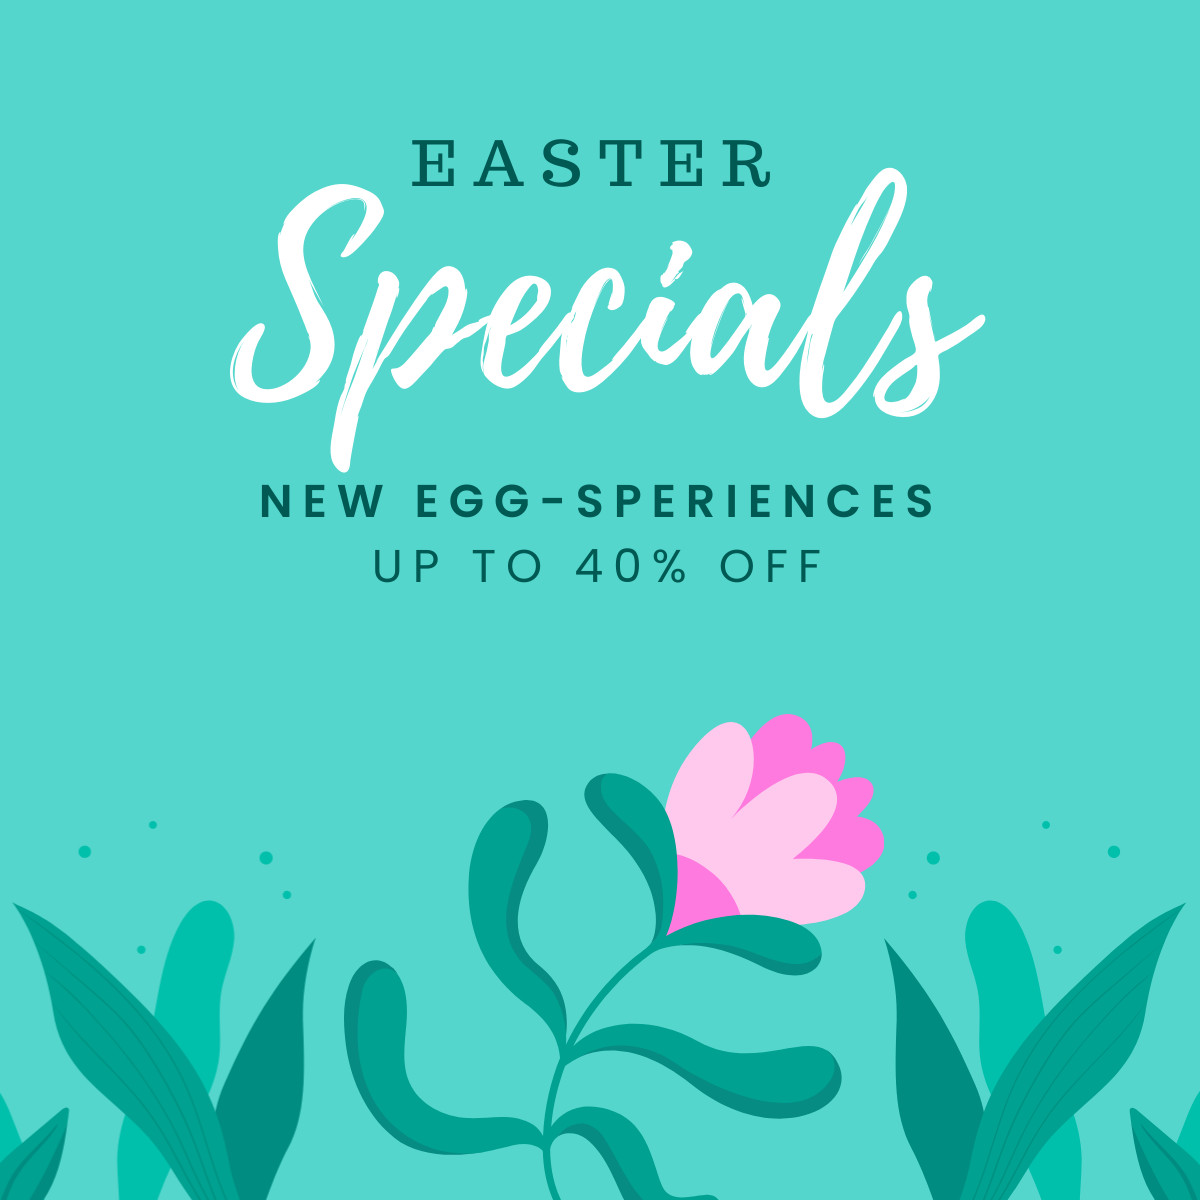 Easter Specials New Egg-sperience Inline Rectangle 300x250